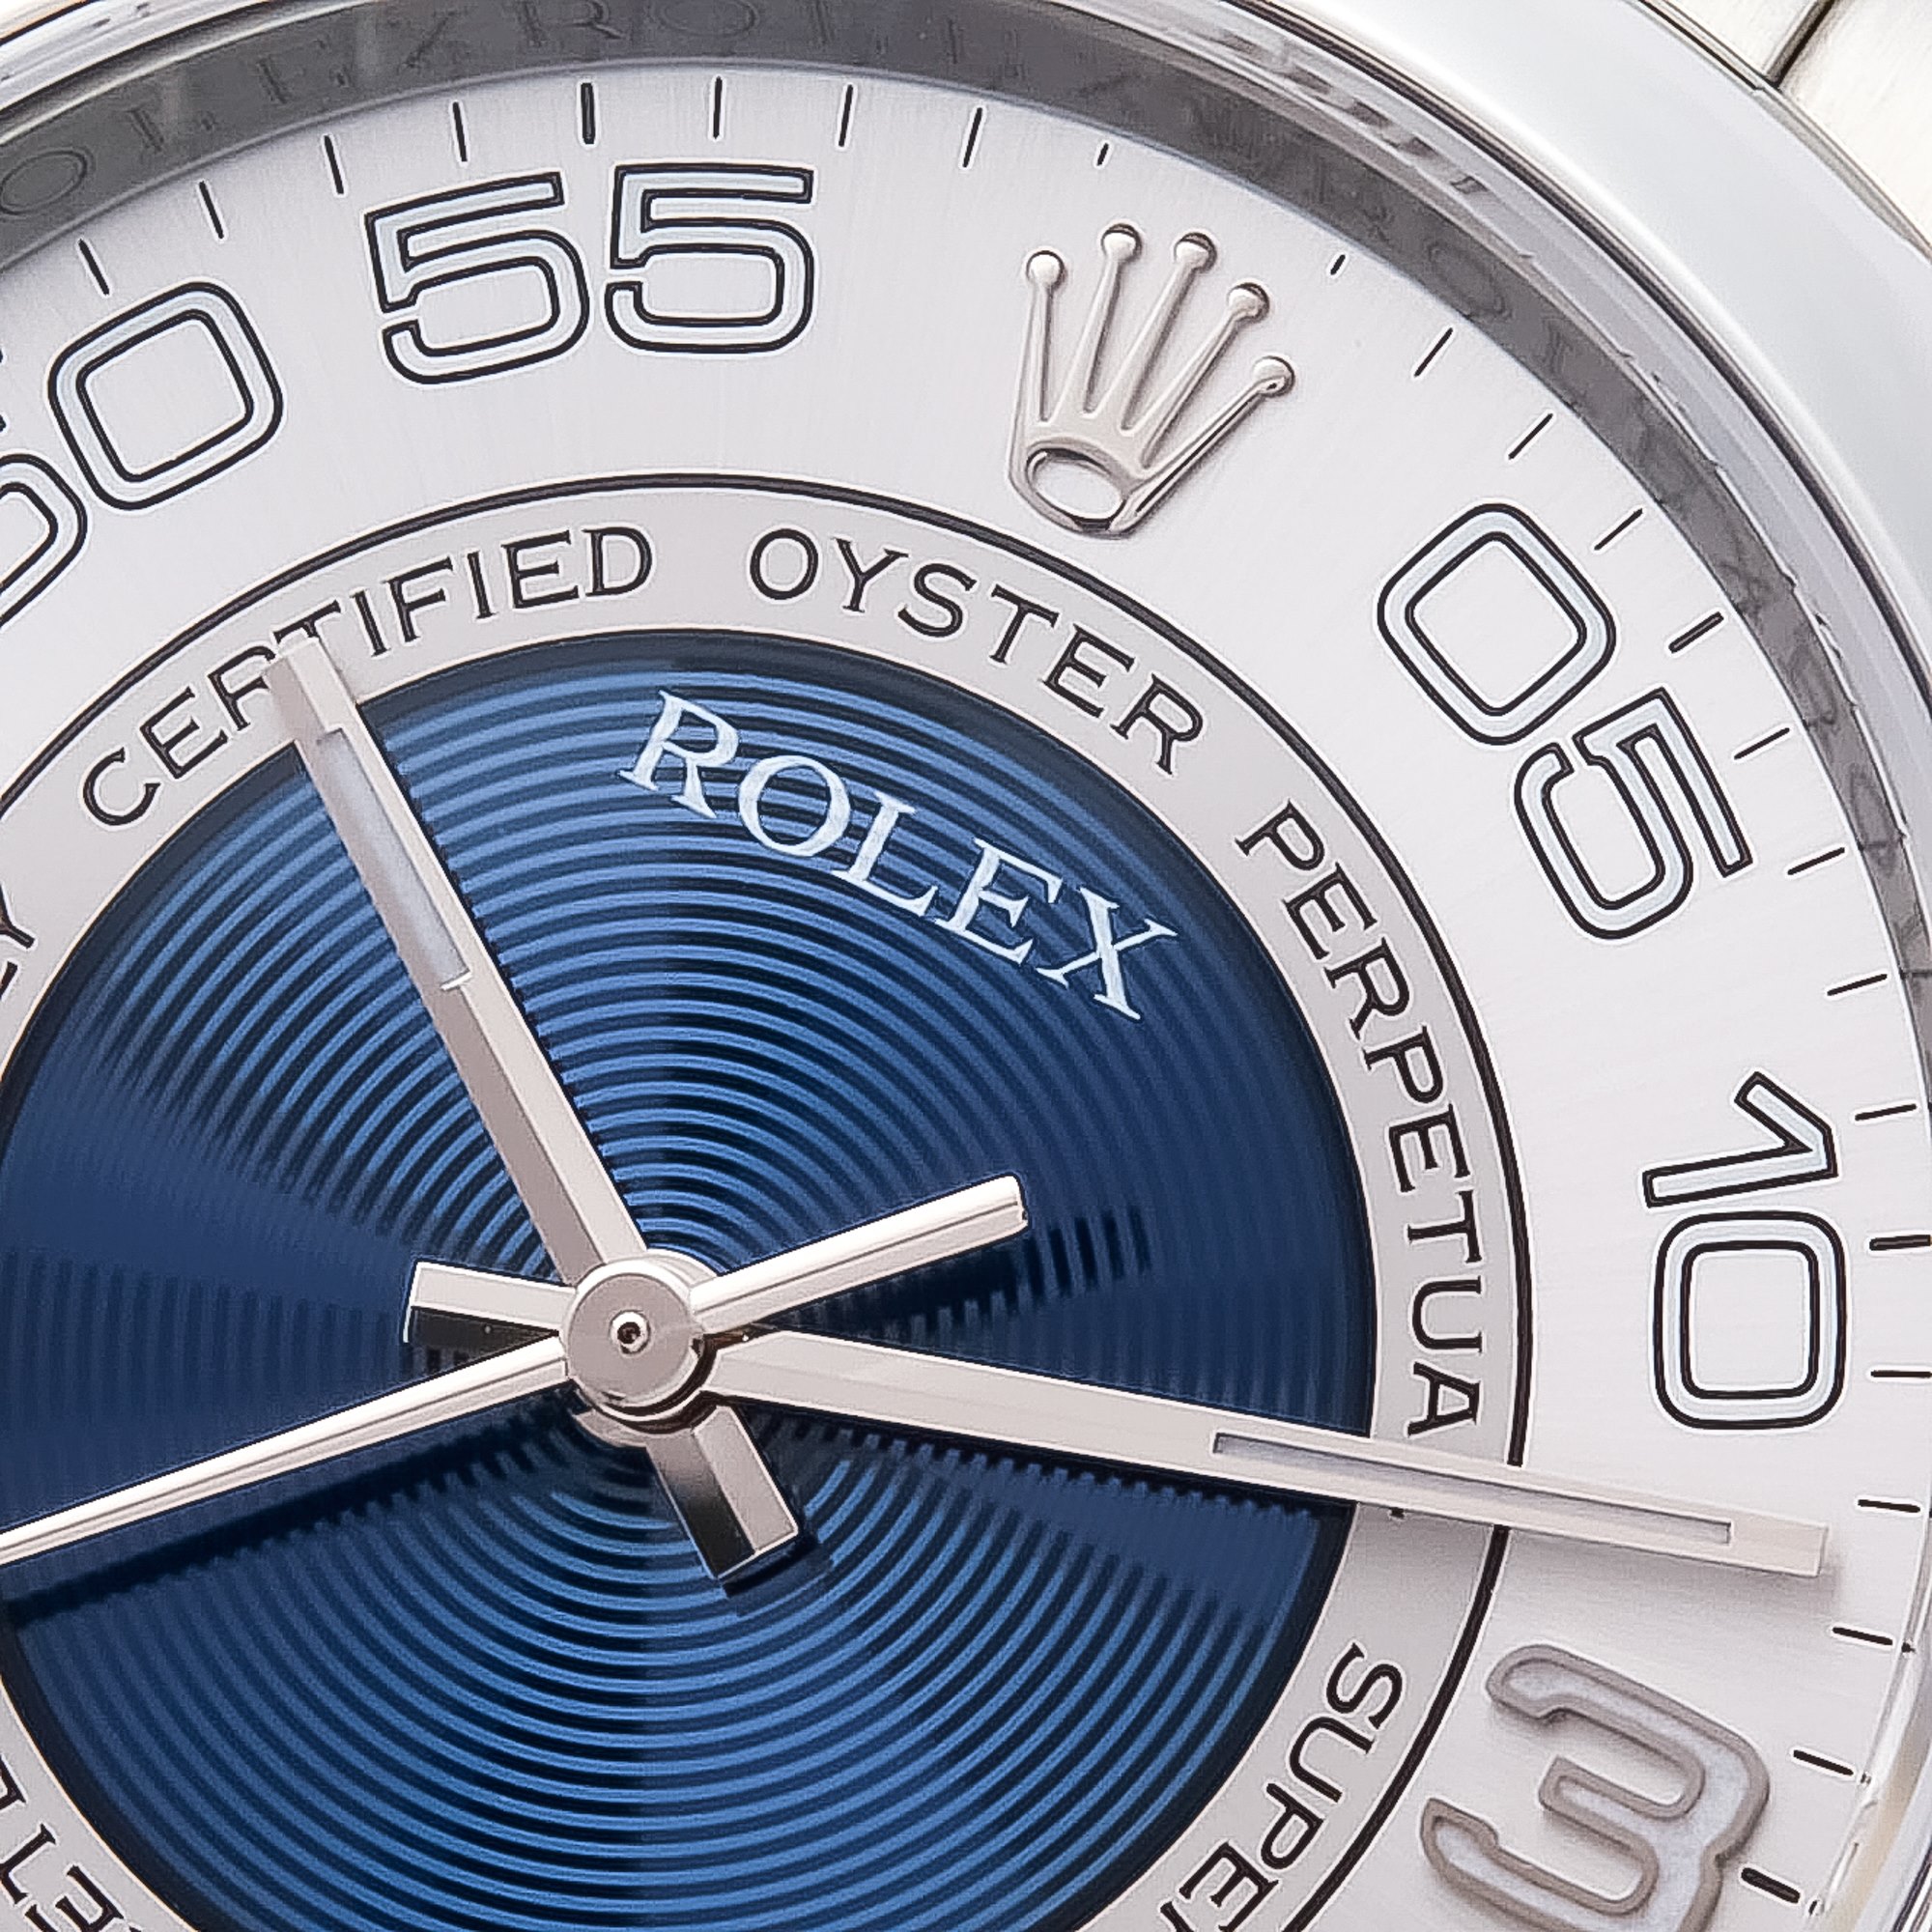 Rolex Oyster Perpetual Roestvrij Staal 116000